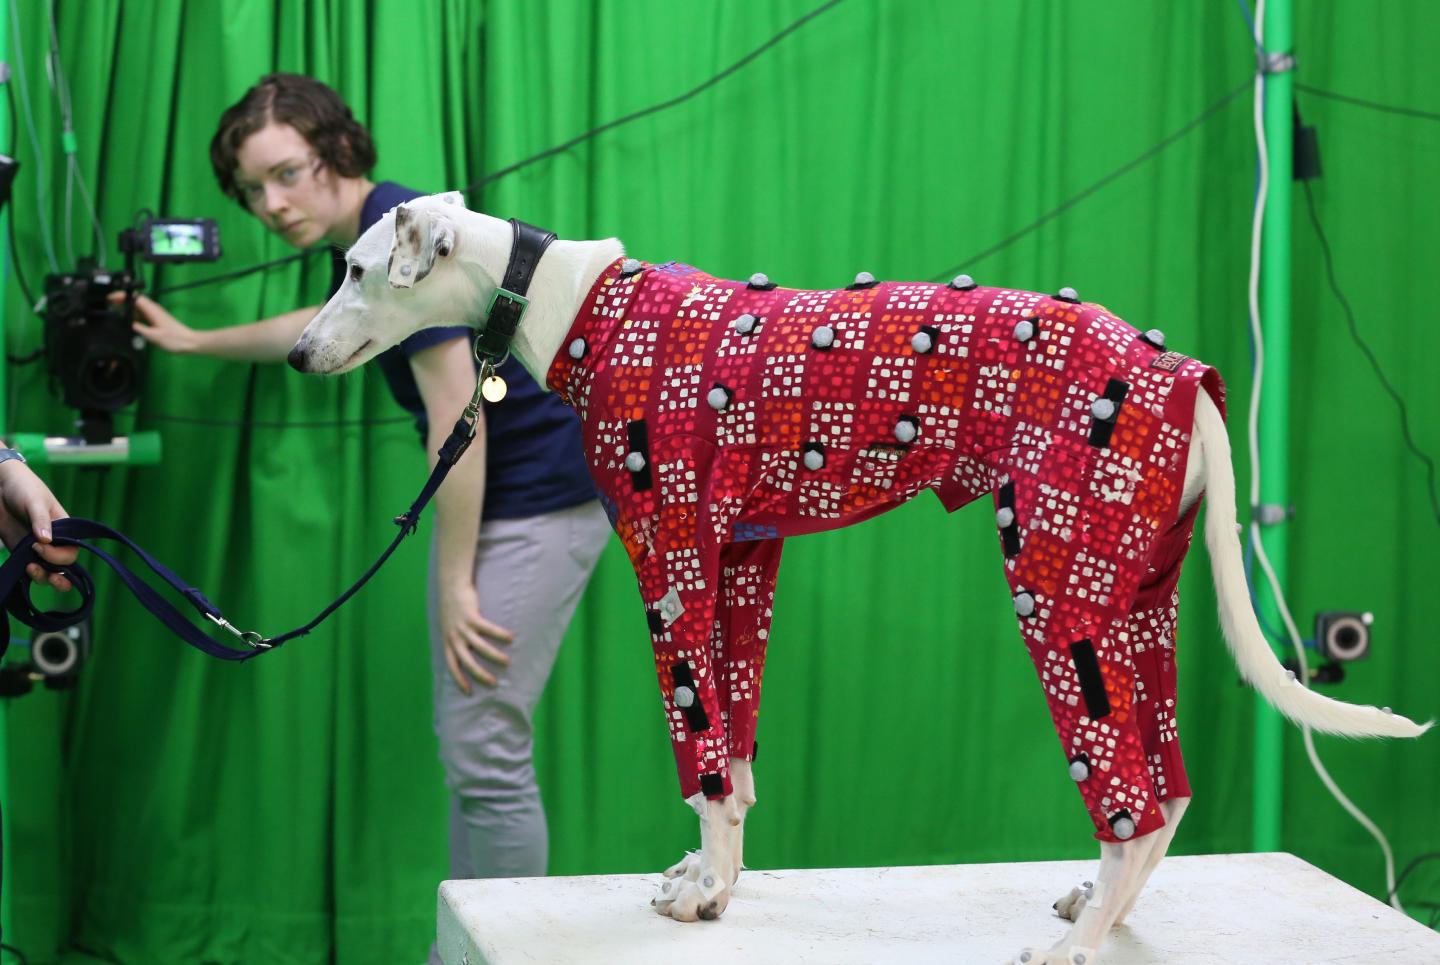 Sinead Kearney adjusts the cameras to collect the motion capture data of a lurcher Source: University of Bath